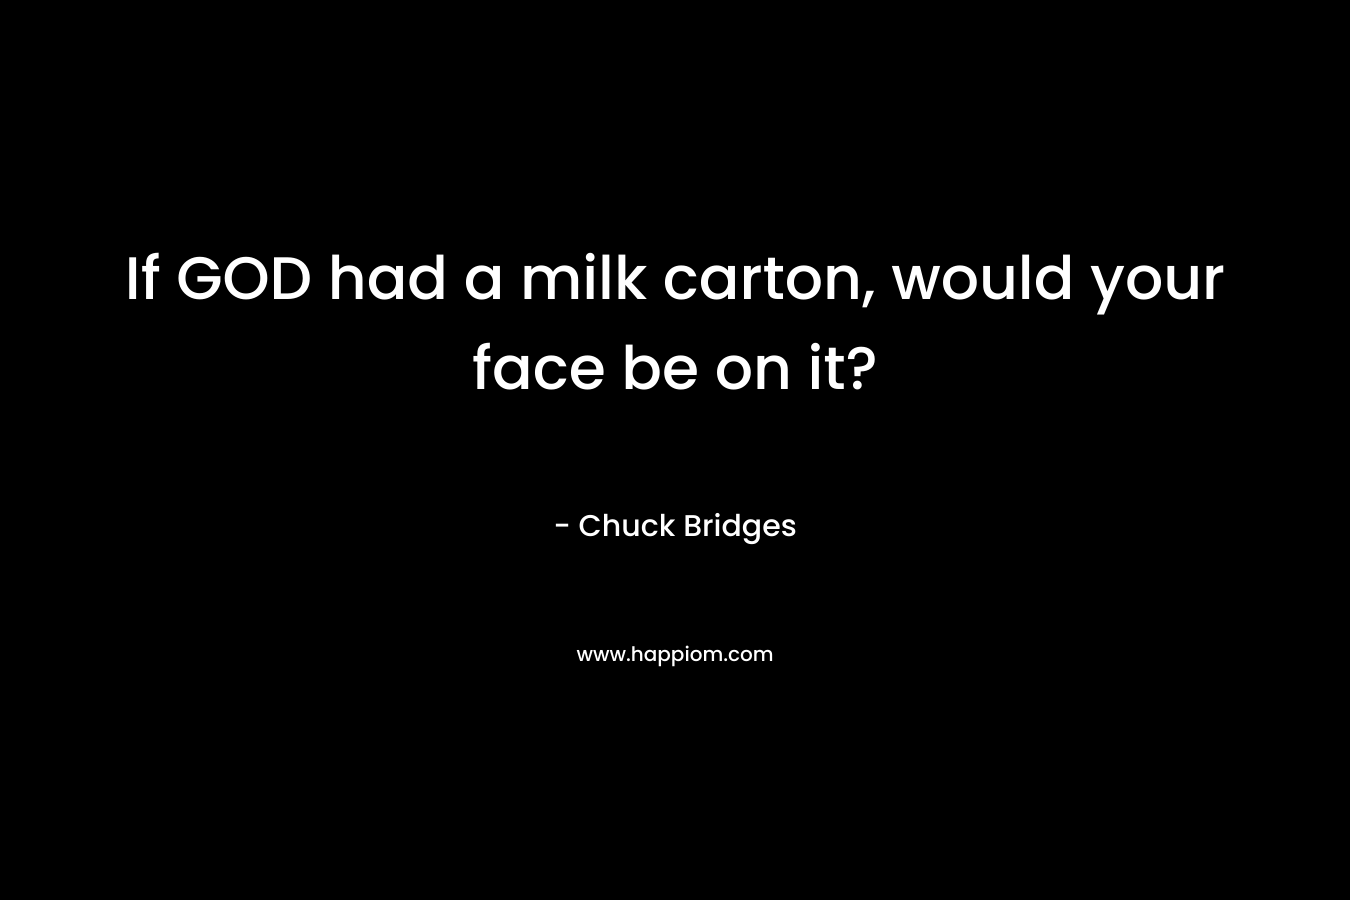 If GOD had a milk carton, would your face be on it? – Chuck Bridges